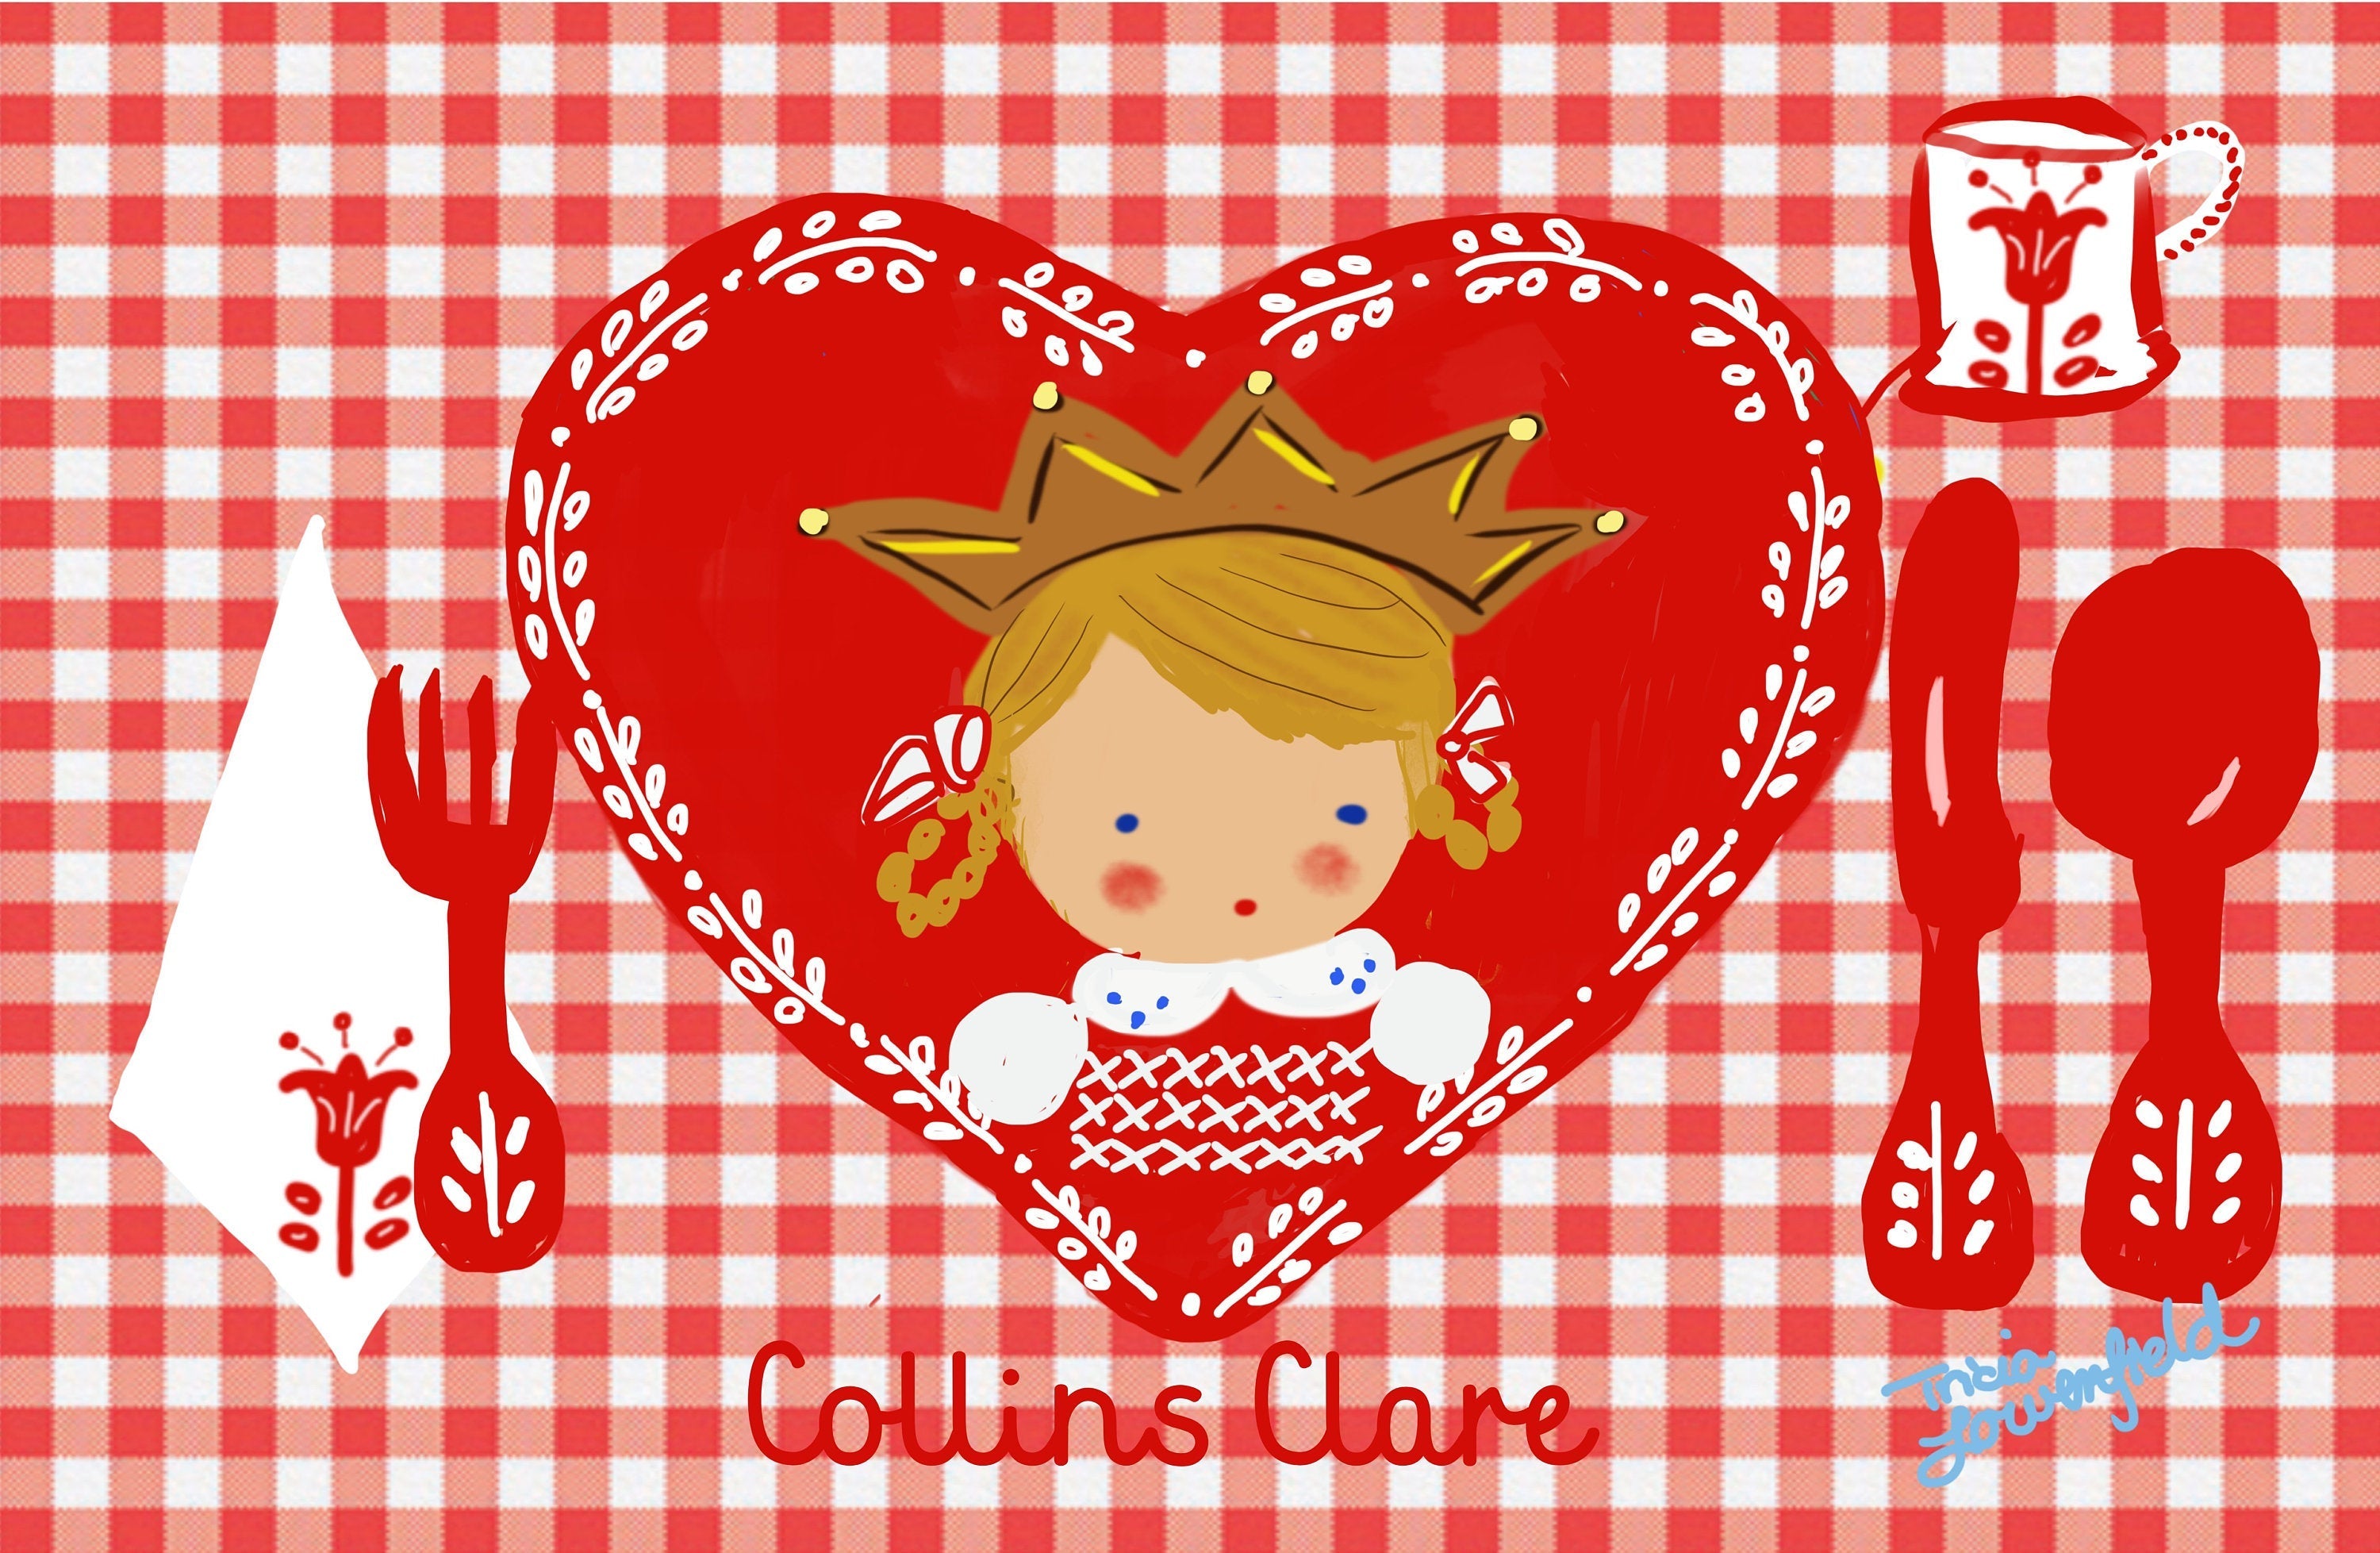 Laminated Placemat - Heart Girl with Crown - Premium  from Tricia Lowenfield Shop 